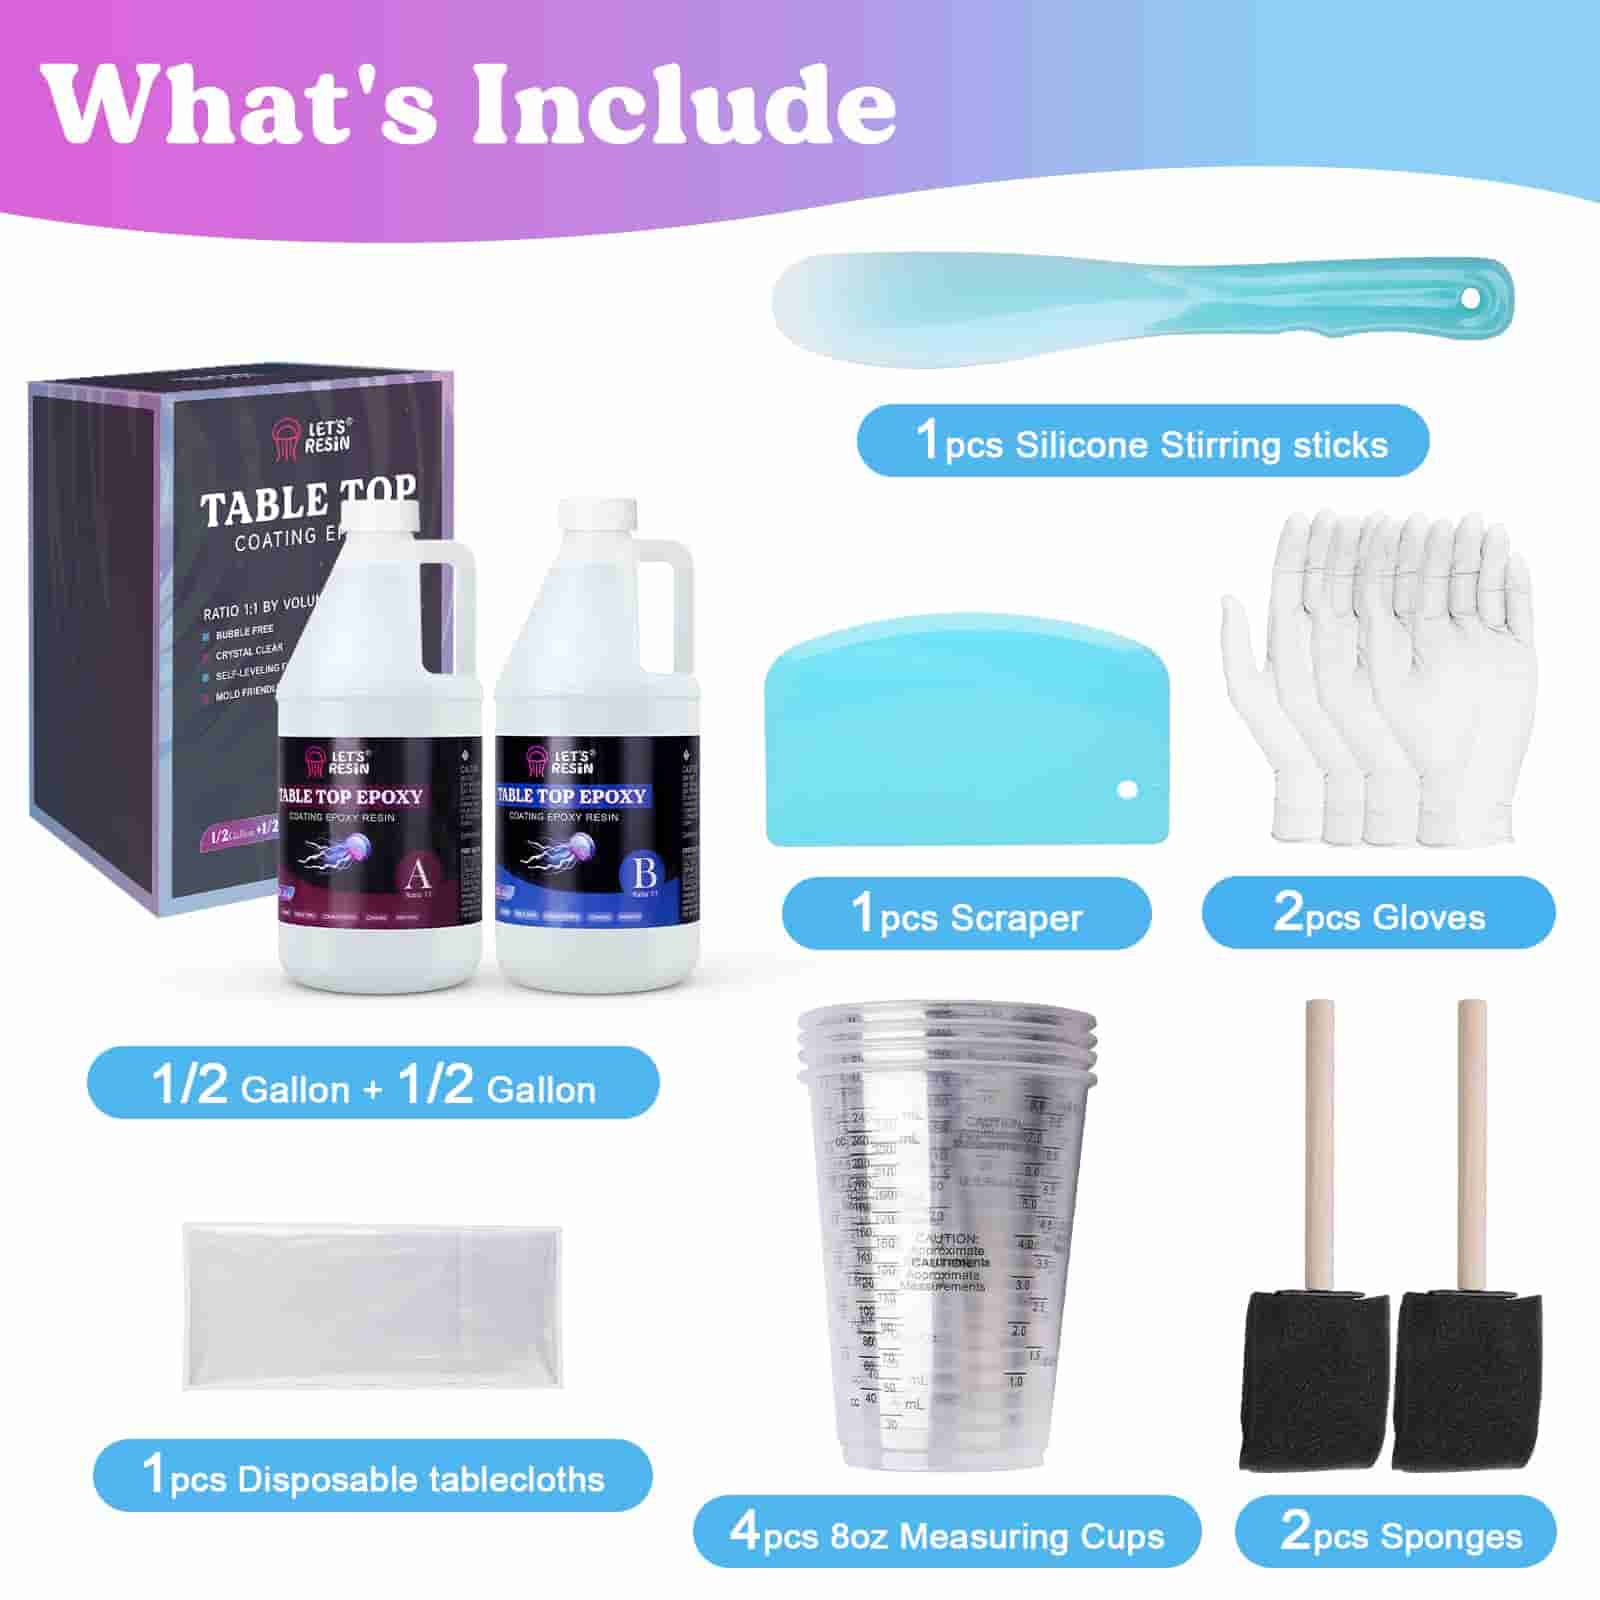 Let's Resin table top epoxy resin 1 gallon kit include 0.5 gallon resin and 0.5 gallon hardener, silicone stirring sticks, scraper, gloves, disposable tablecloths, 4pcs 8oz measuring cups and 2pcs sponges. 